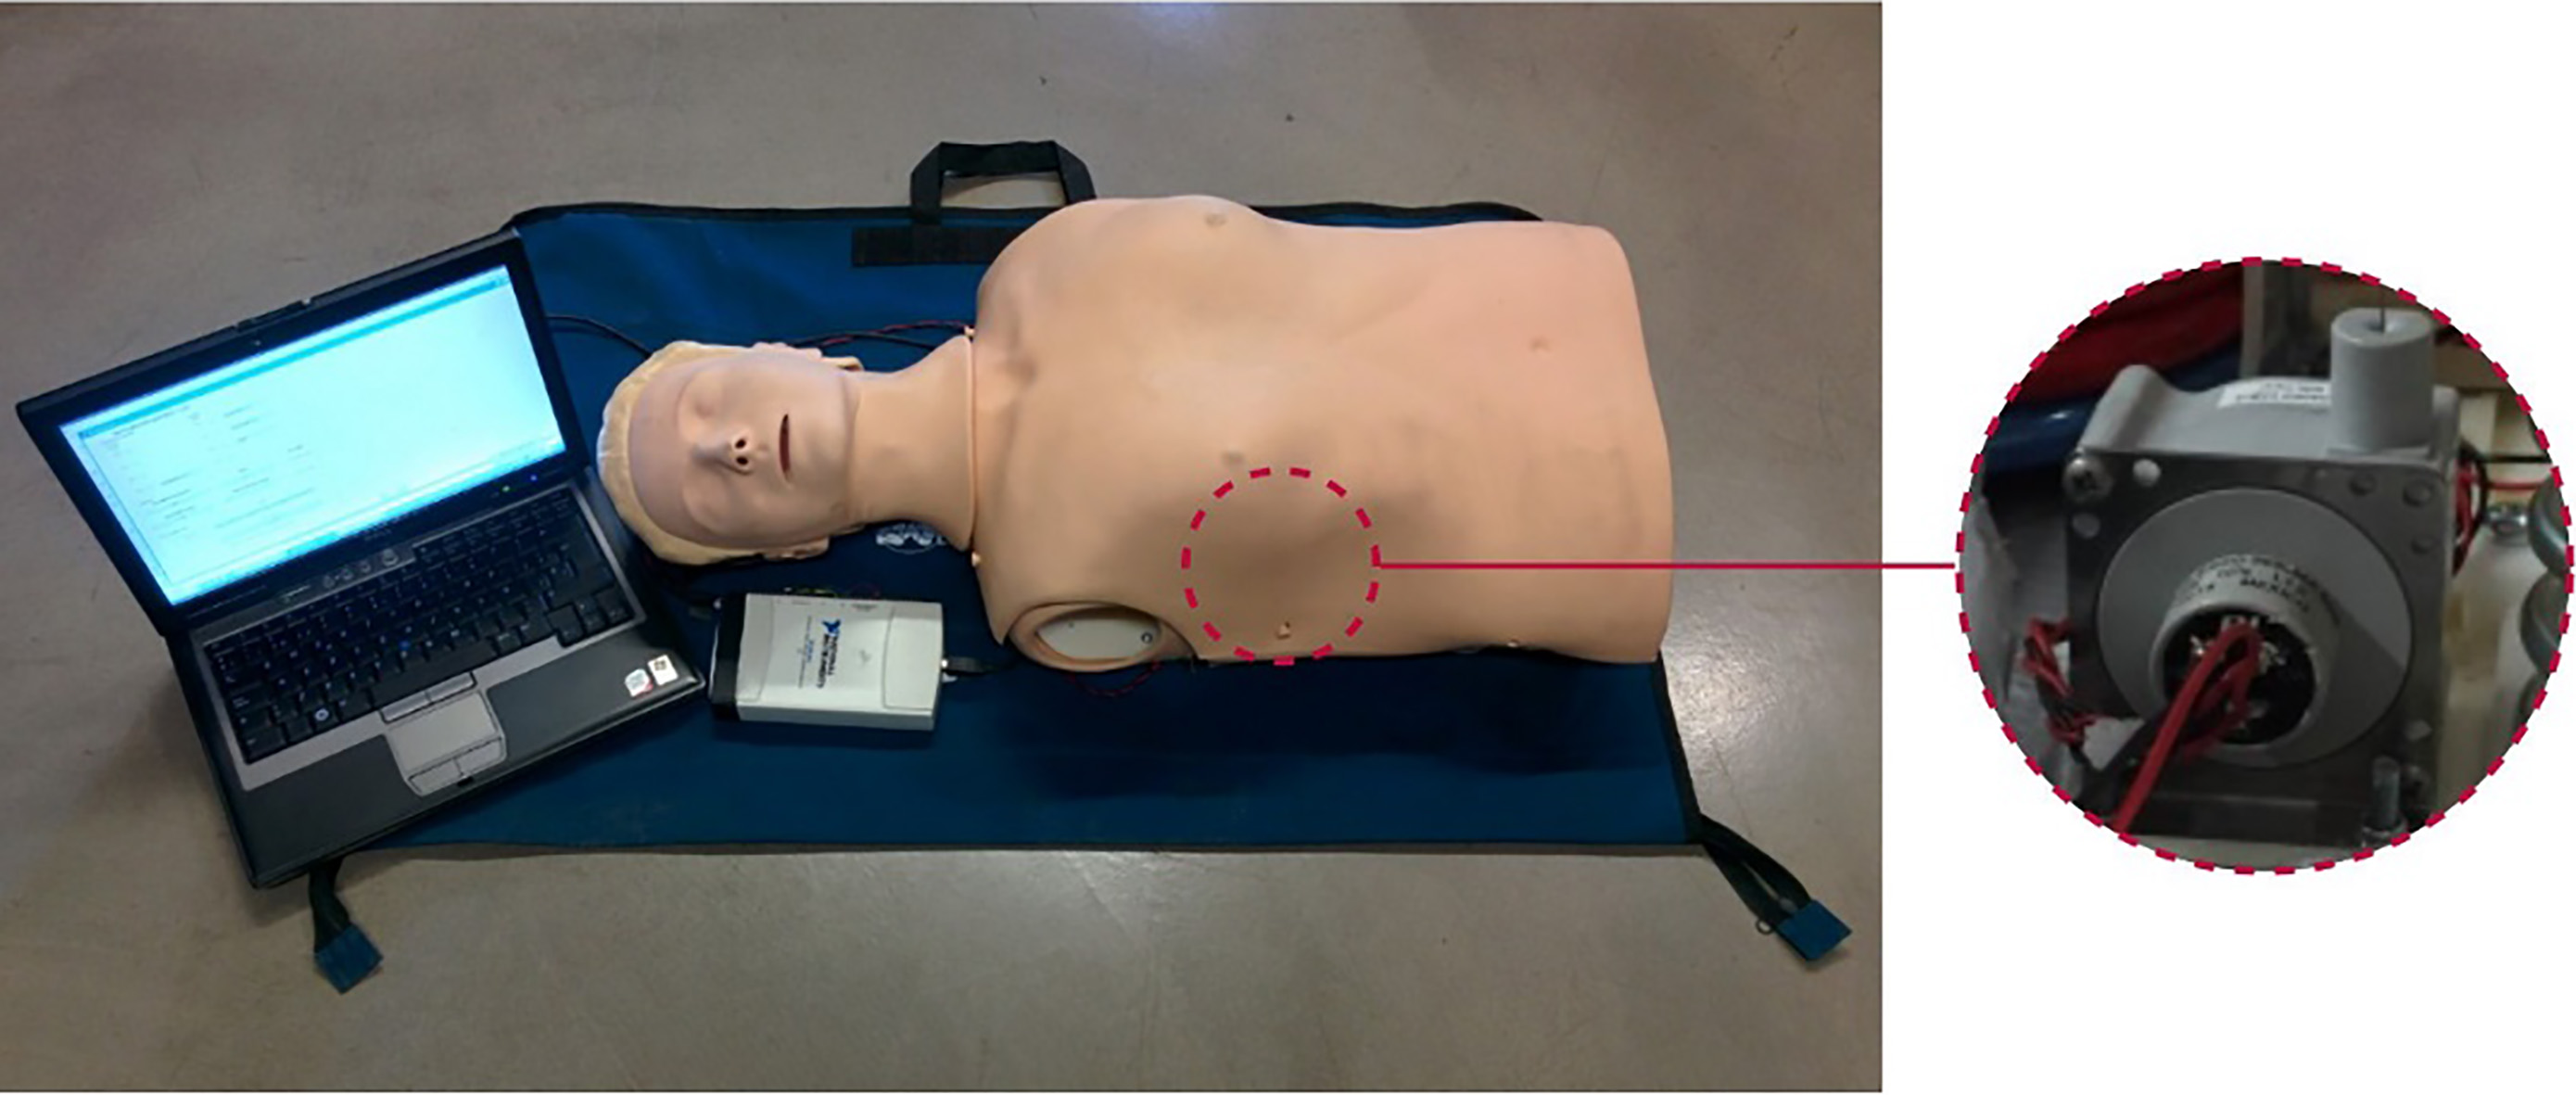 Experimental setup. Manikin fitted with a displacement sensor, acquisition card and laptop computer.